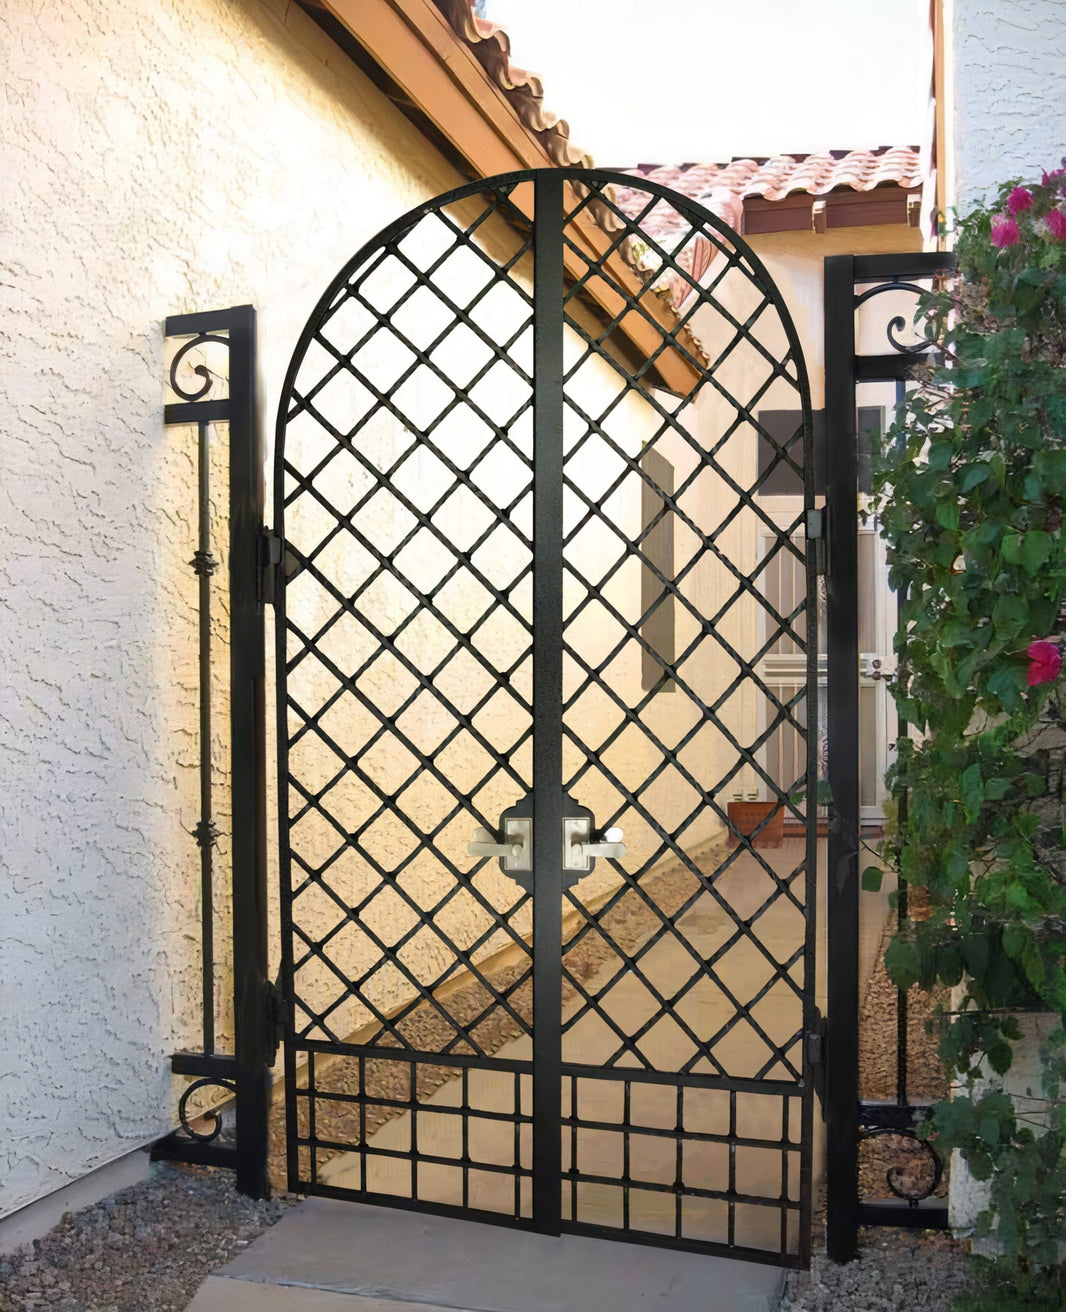 Modern Square Check Design Metal Back Yard Gate | Classic Fabrication Wrought Iron Garden Gate | Made in Canada – Model # 339